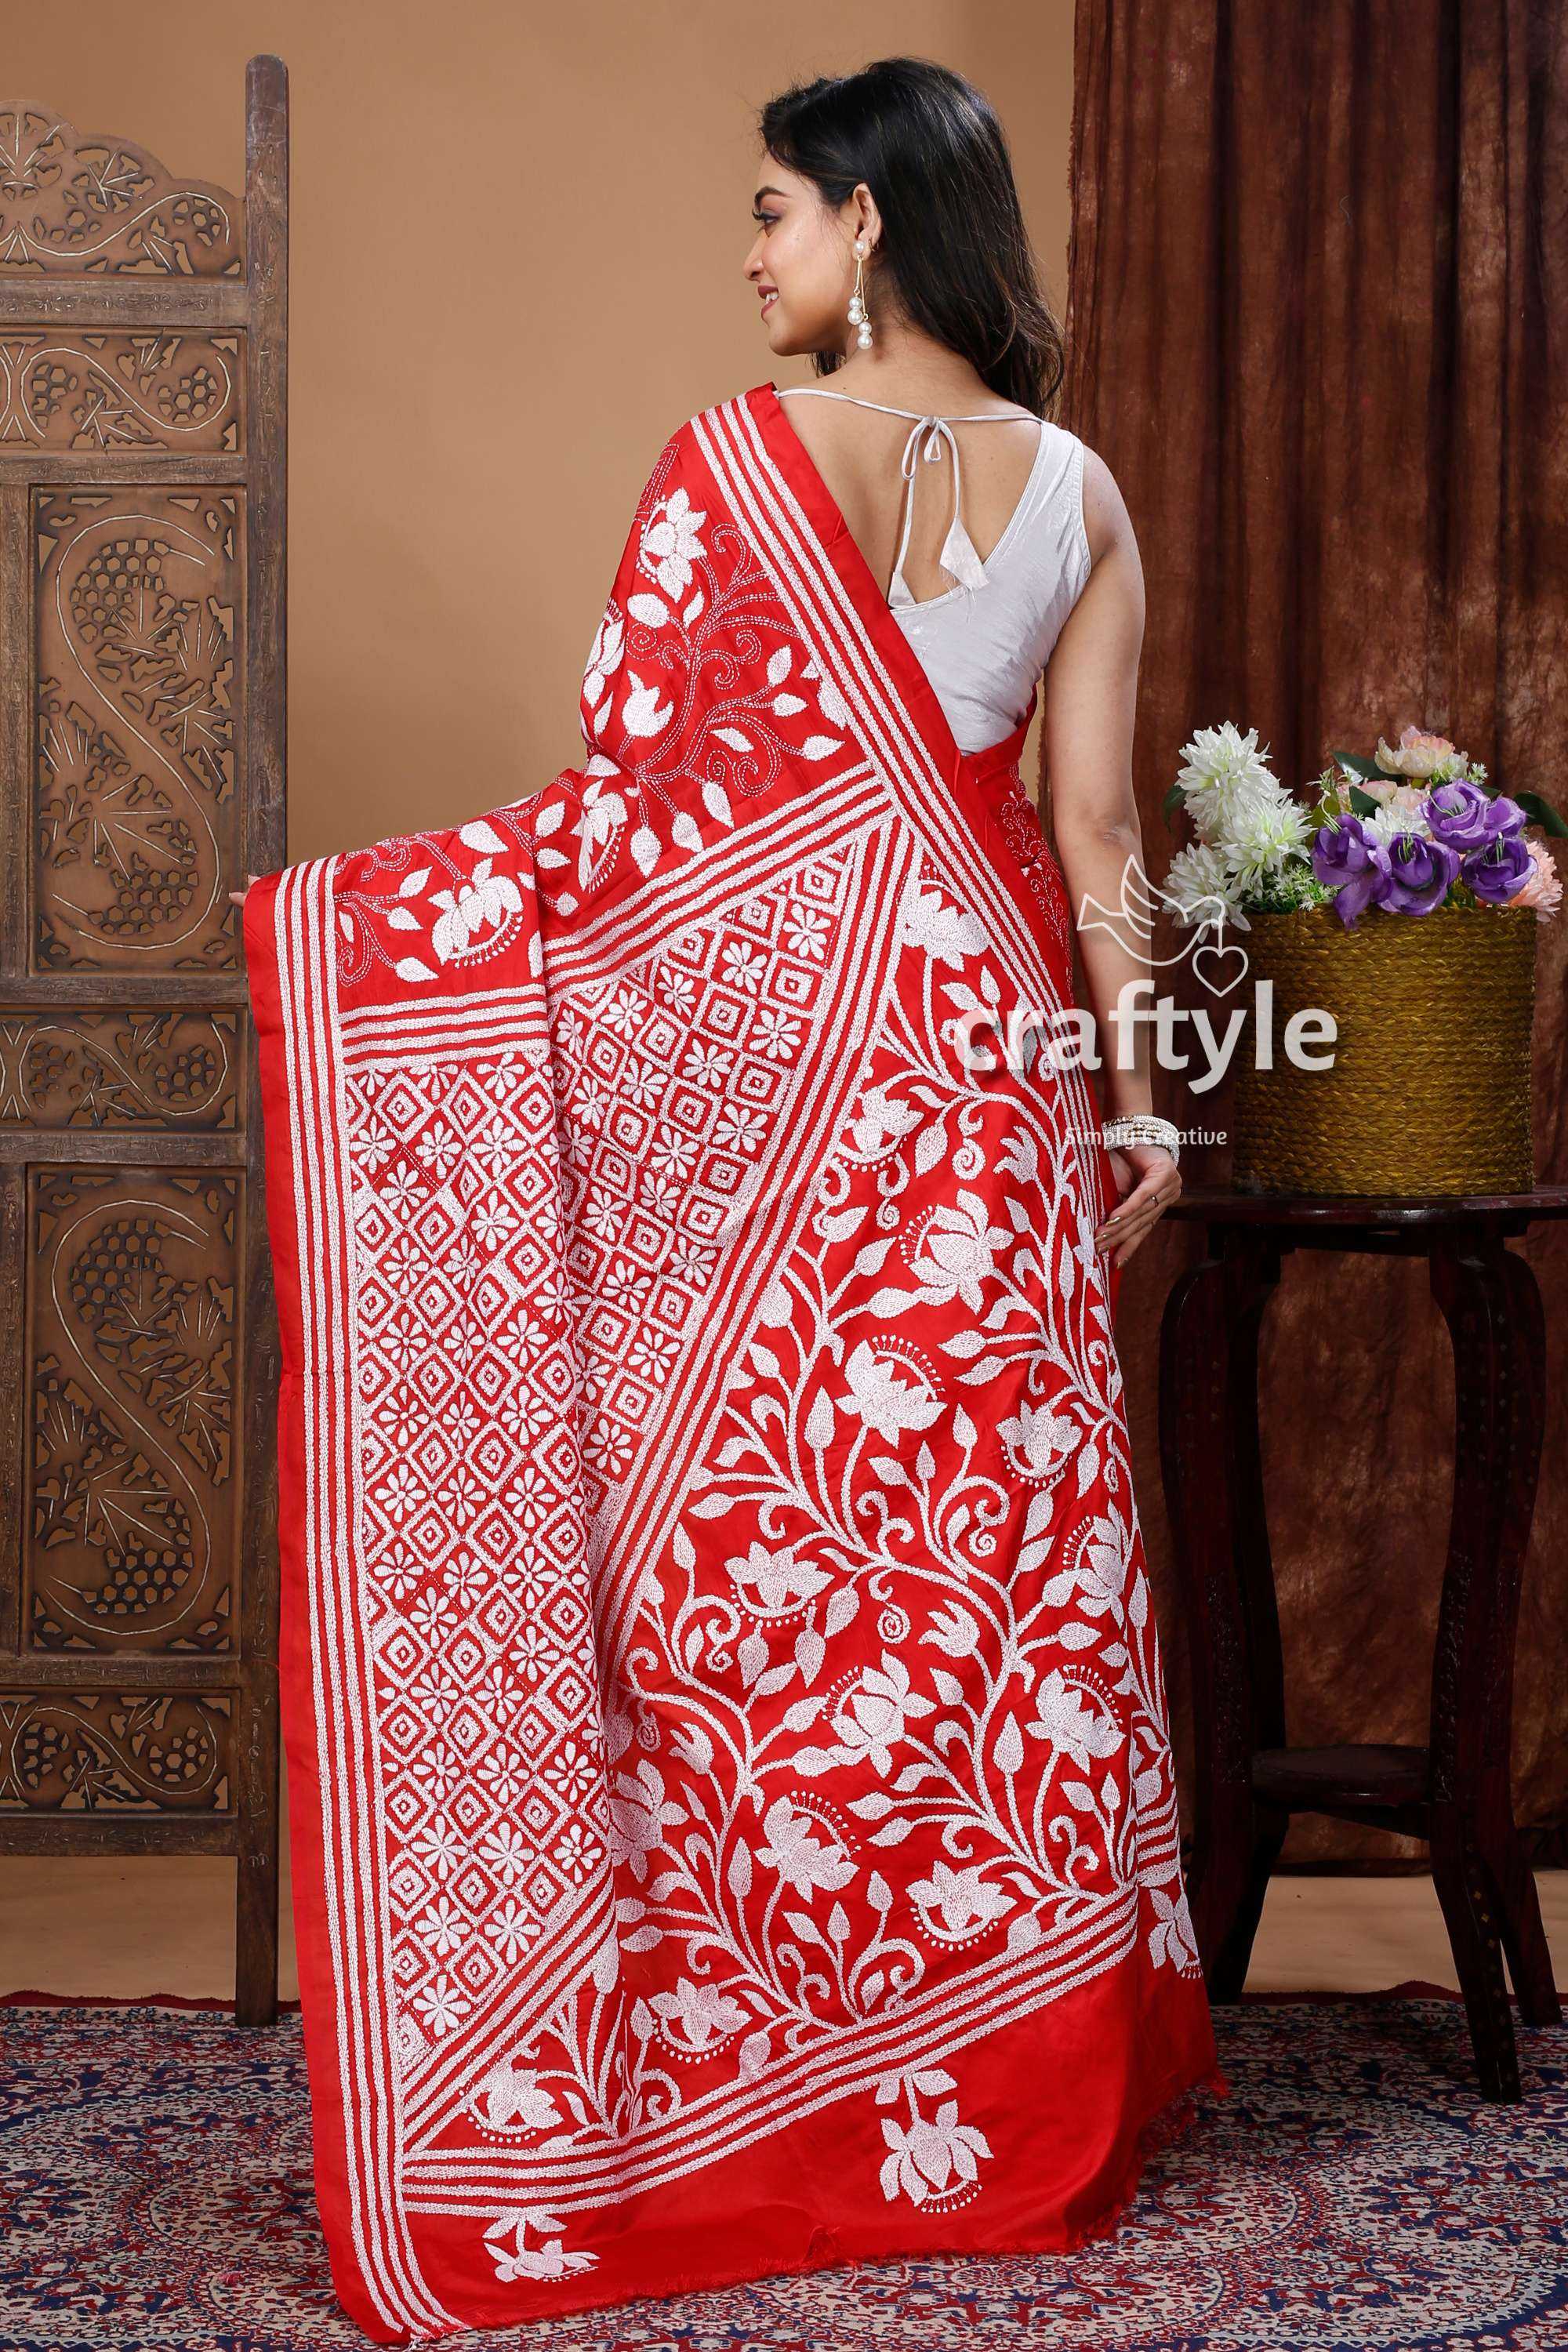 Silk Kantha Stitch Saree - Red and White Thread Work for a Timeless Look-Craftyle